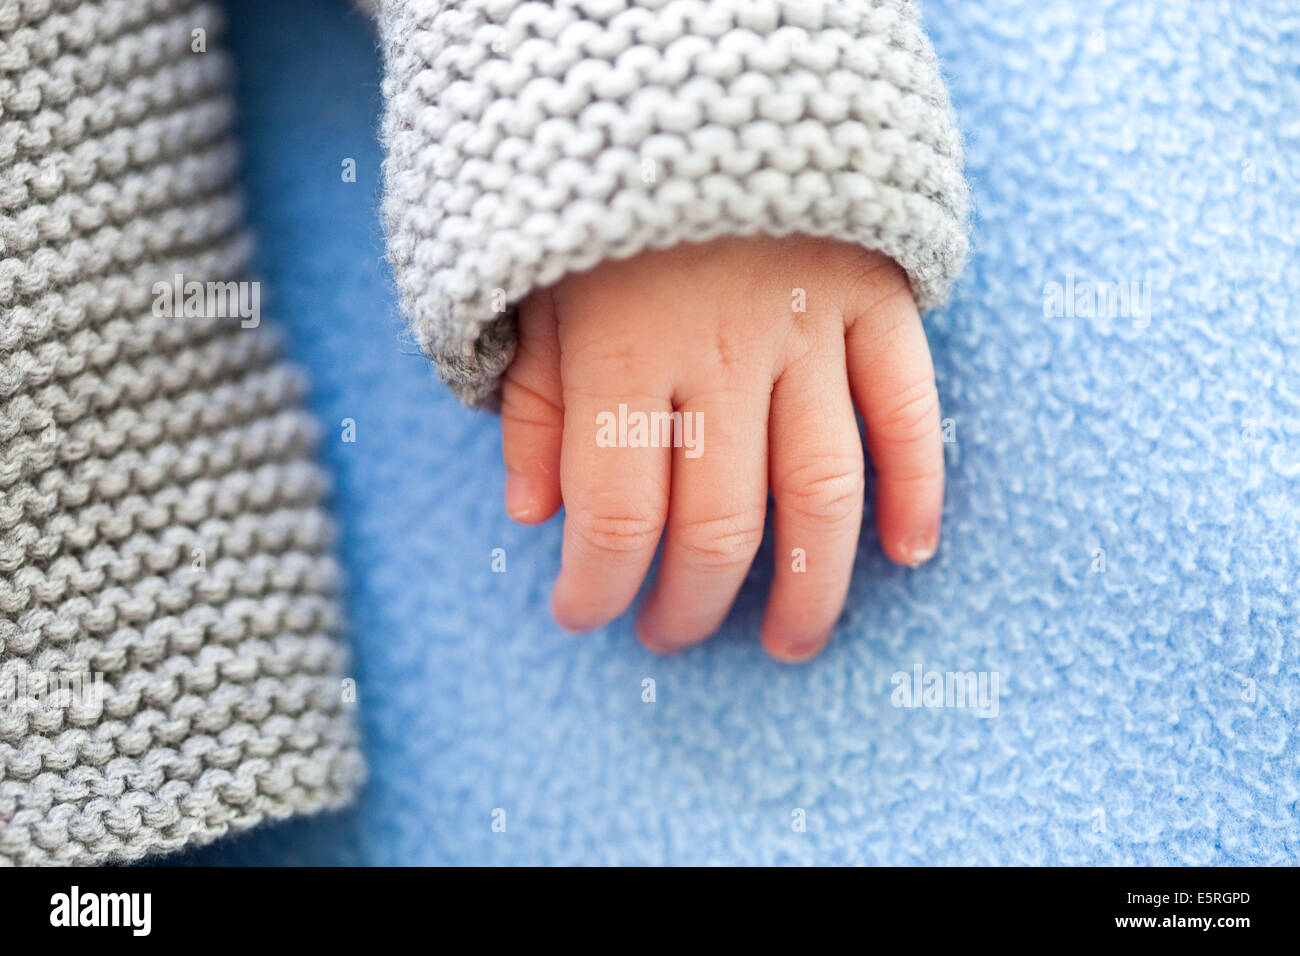 3-week-old baby's hand. Stock Photo